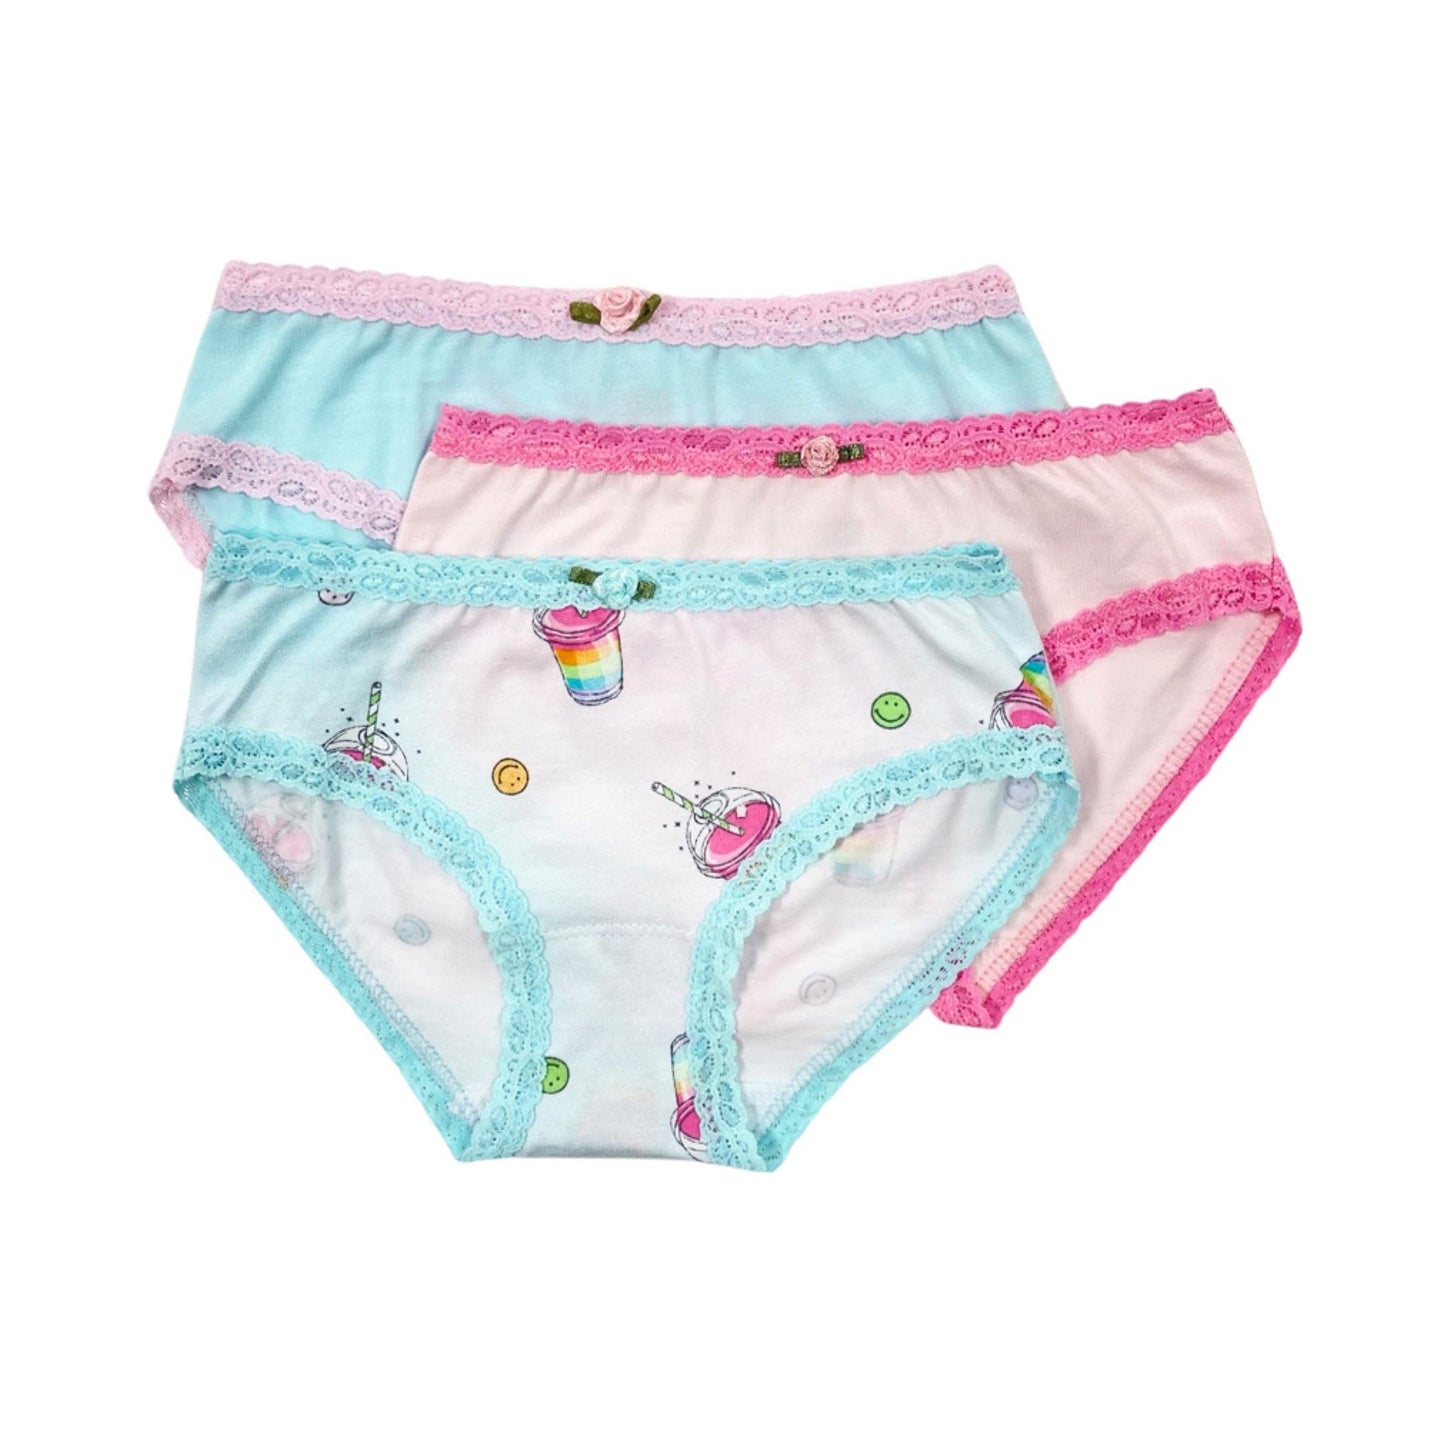 Esme U20 Girls Comfortable Underwear Panty 7pc XS S M L XL PT for Sensitive  Skin Made in Usa 